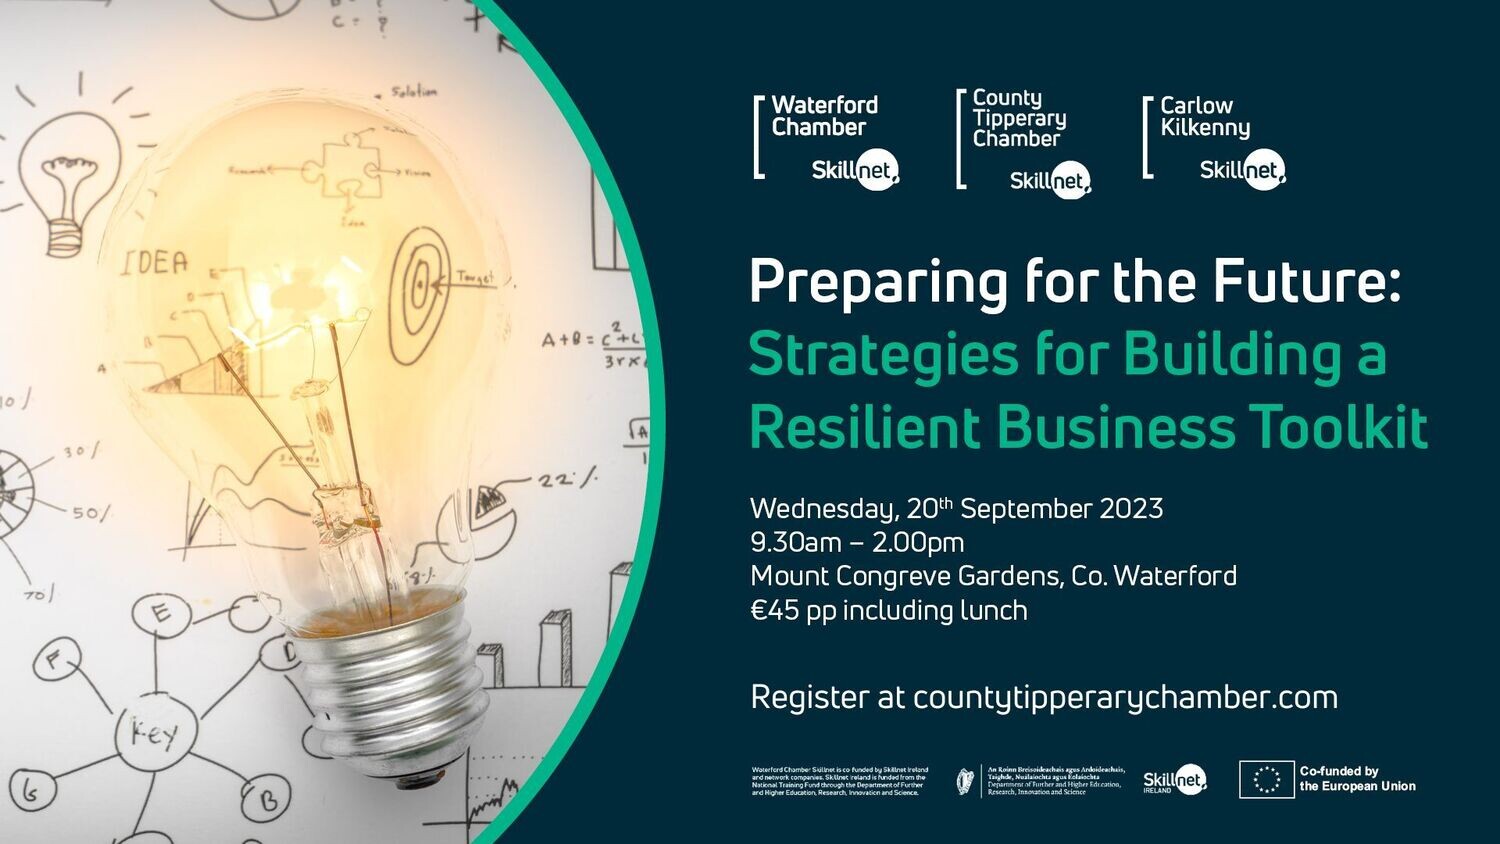 Preparing for the Future - Strategies for Building a Resilient Business Toolkit